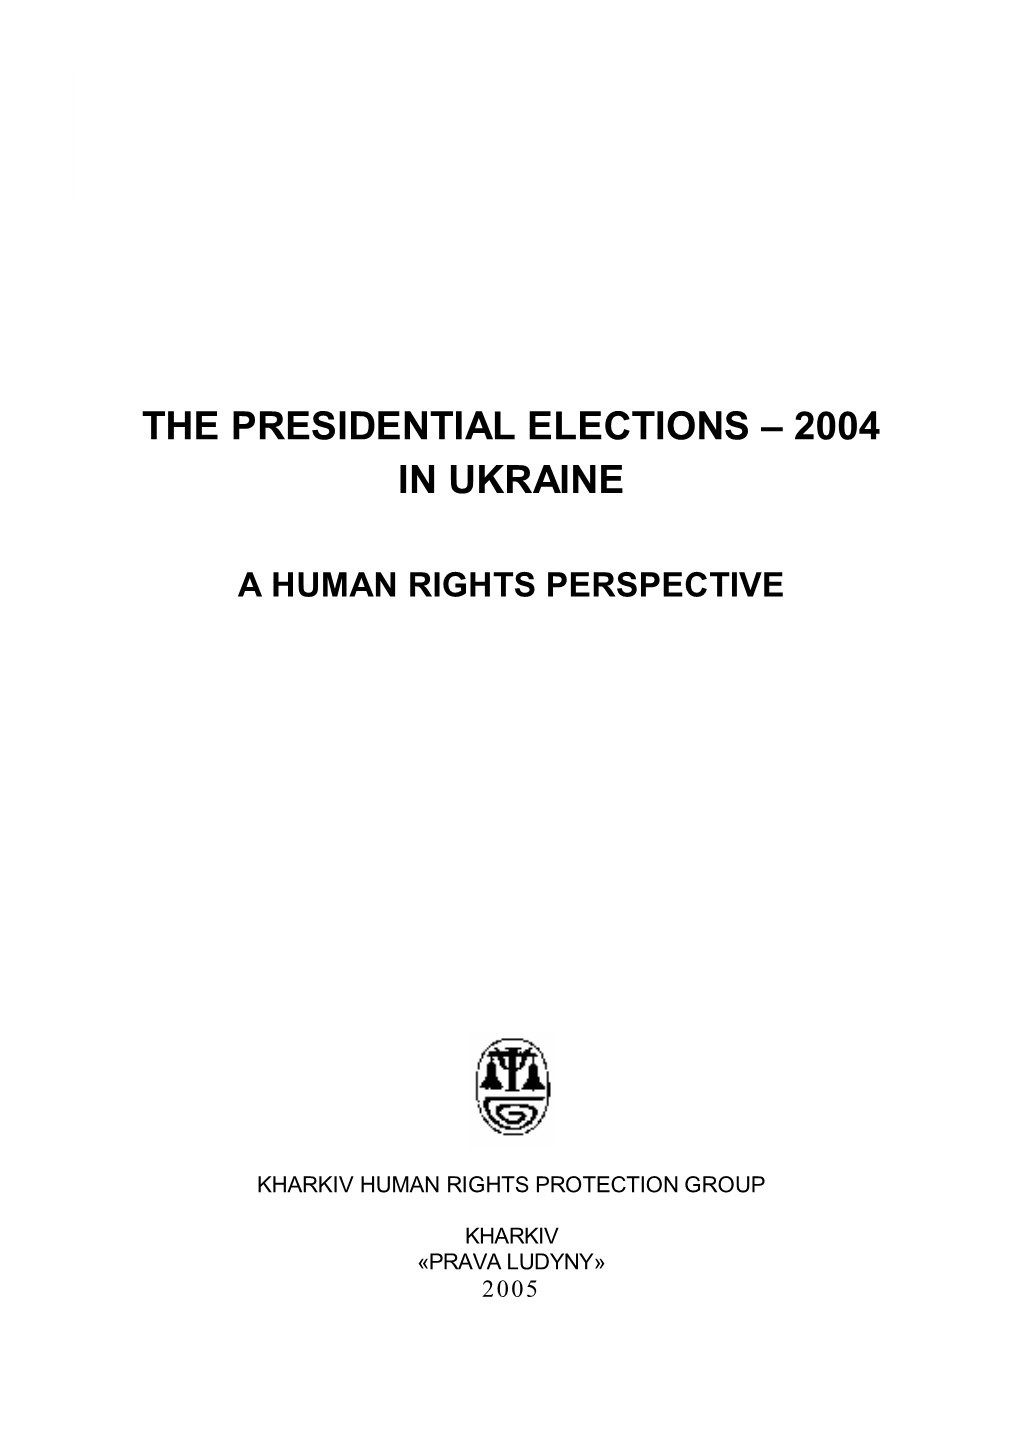 The Presidential Elections – 2004 in Ukraine